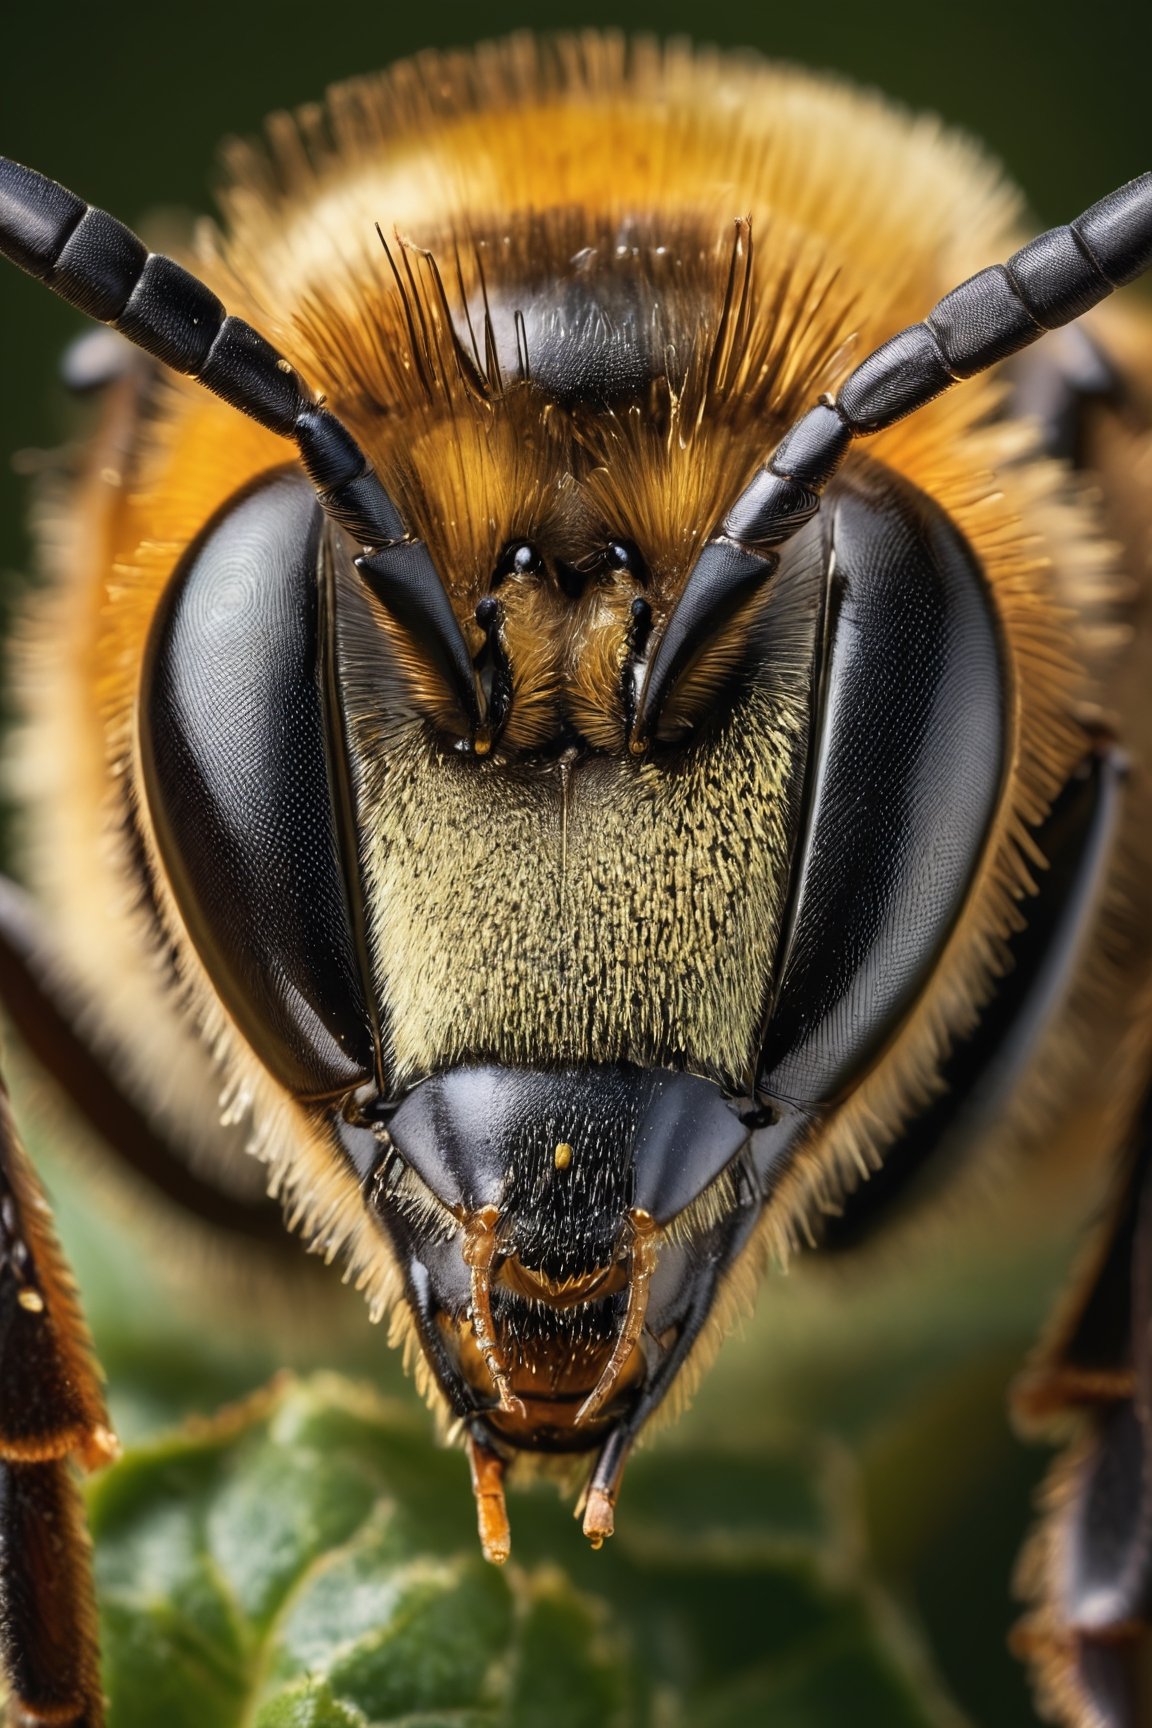 Marco photography of a bee head, everything sharp in focus, highly detailed